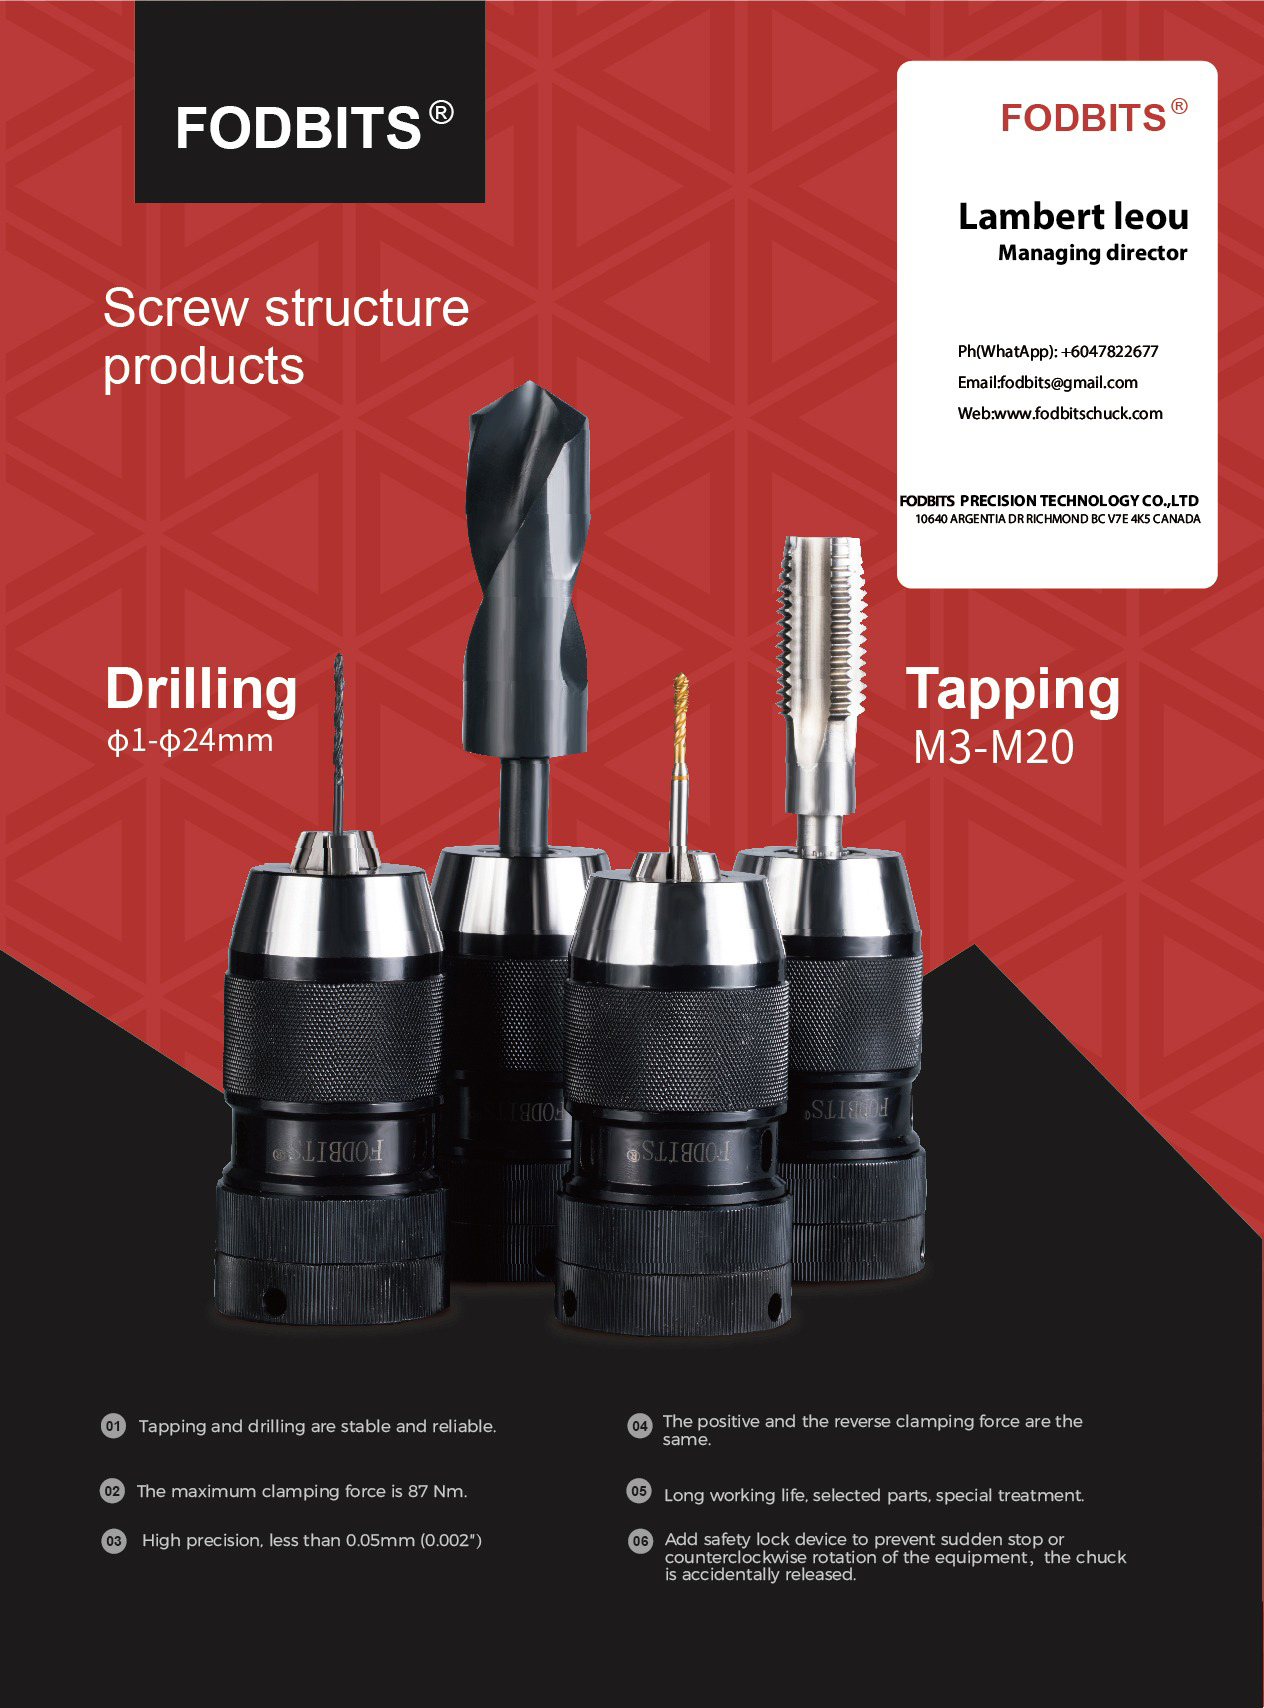 Screw-structureproducts 02